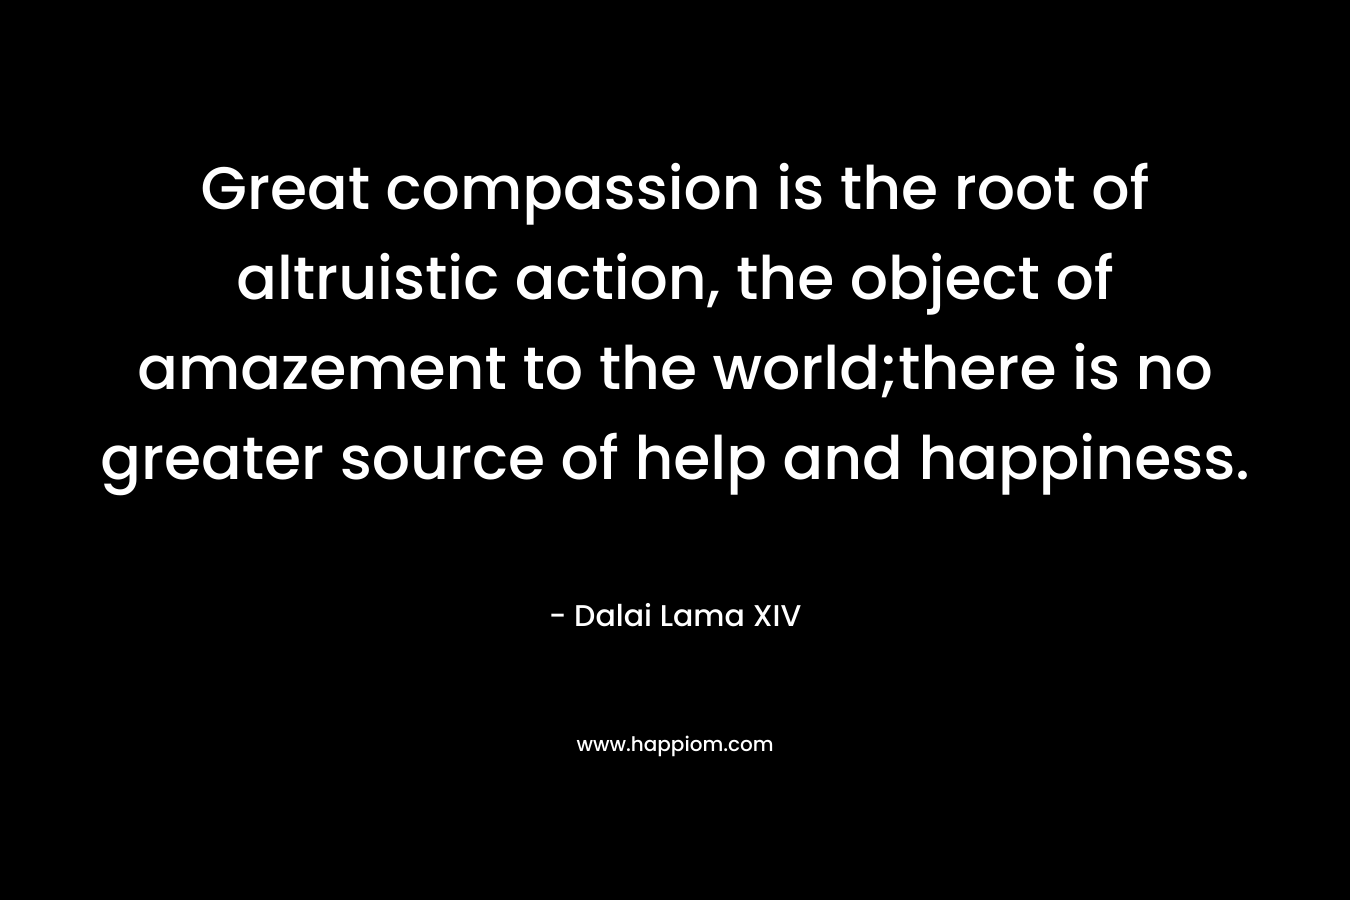 Great compassion is the root of altruistic action, the object of amazement to the world;there is no greater source of help and happiness. – Dalai Lama XIV